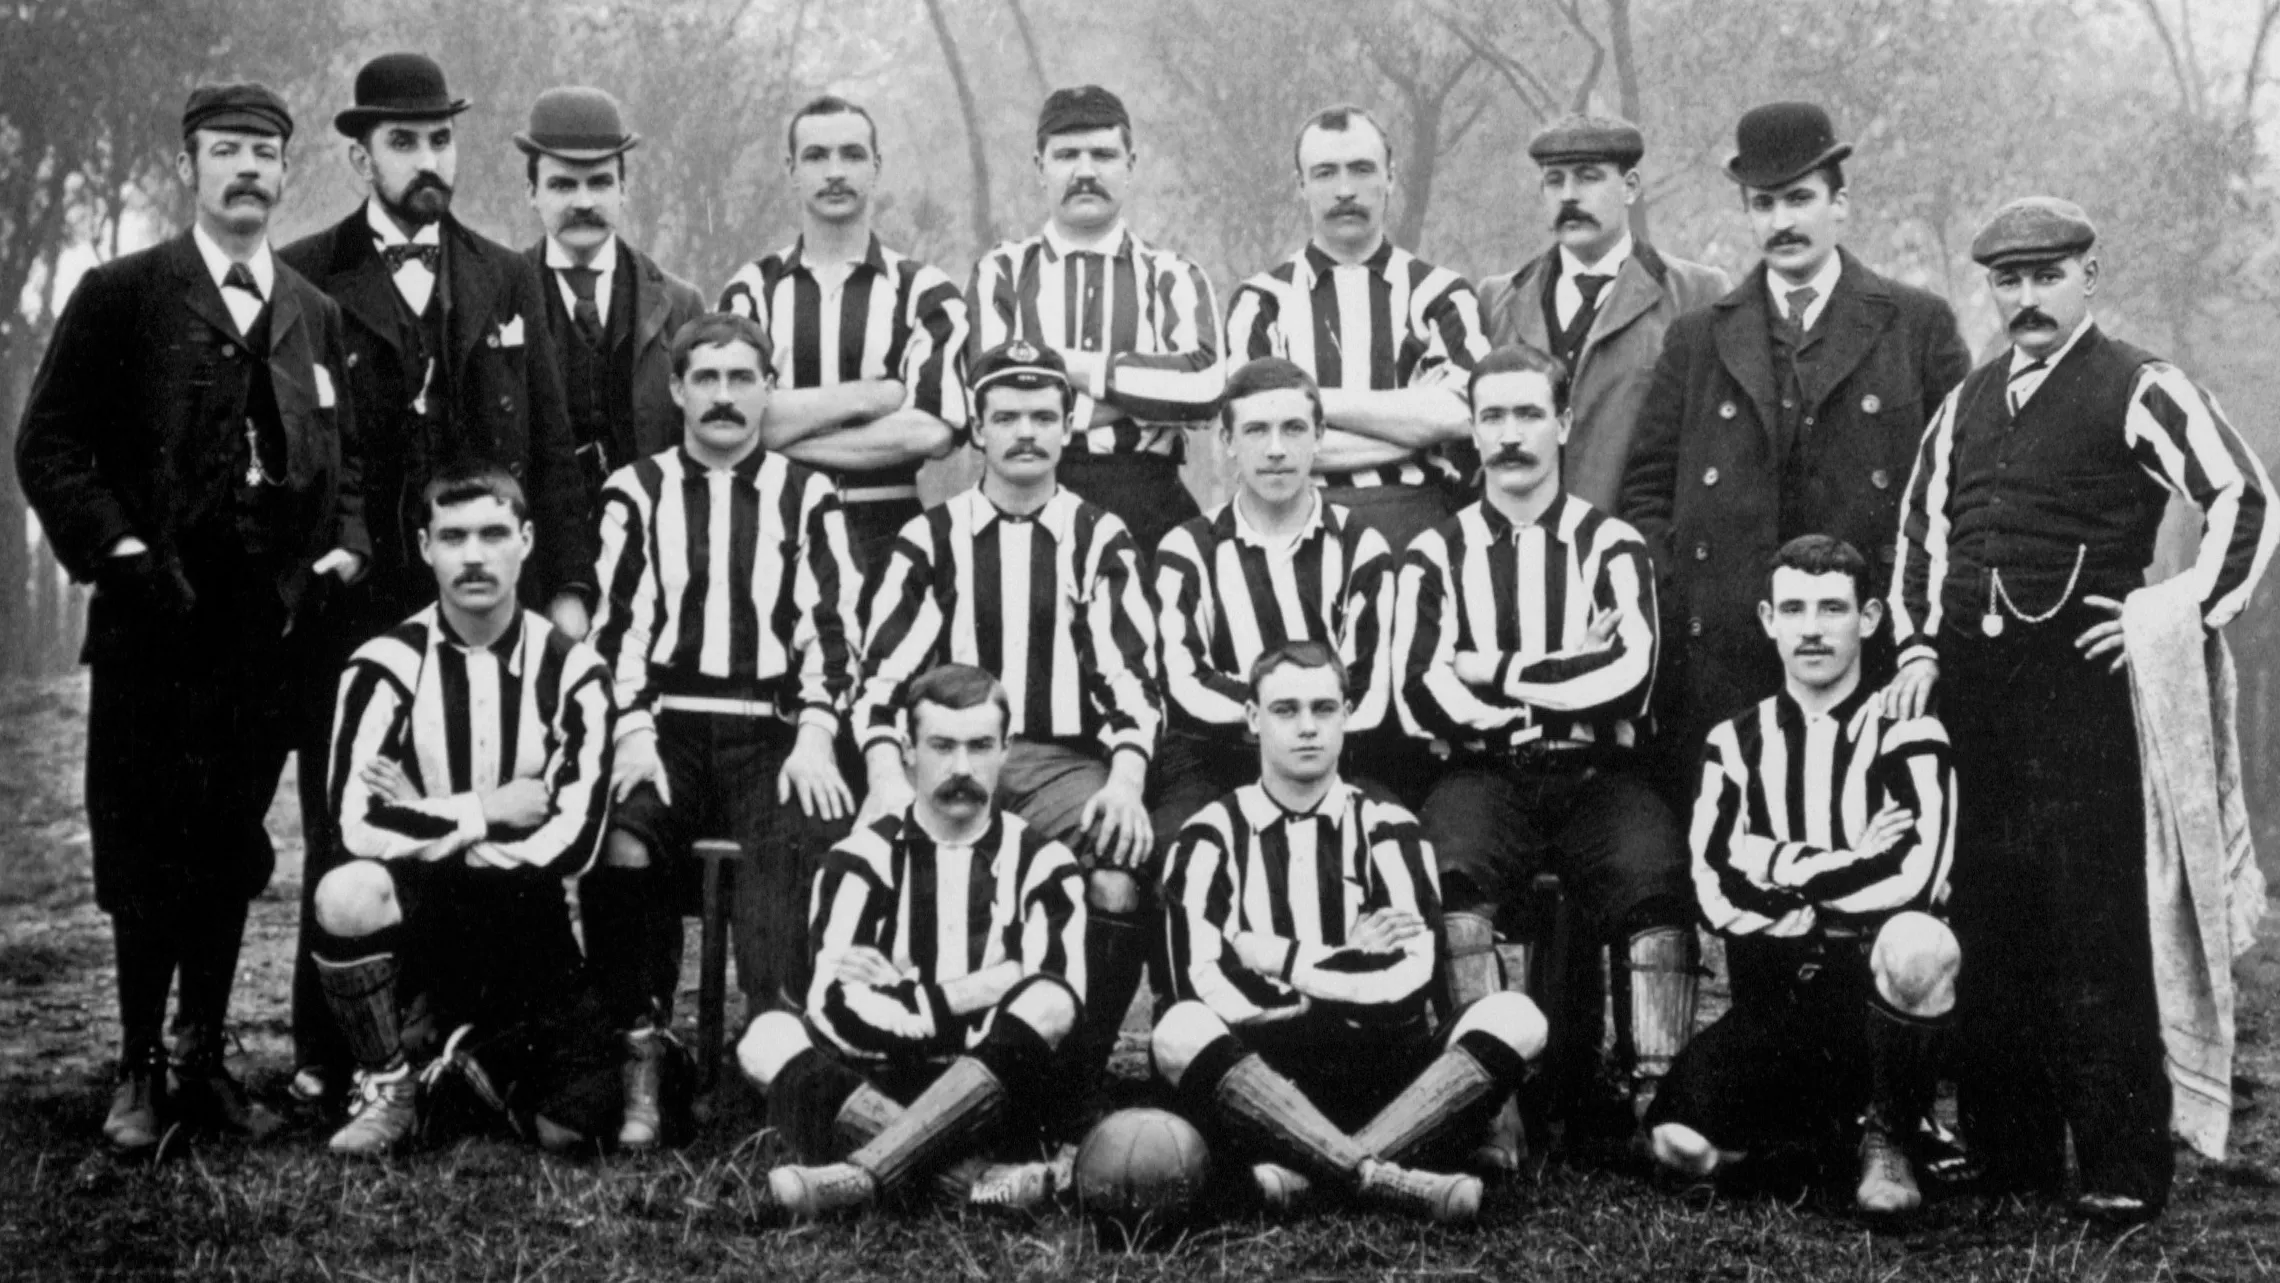 New Castle United in 1895 | SportzPoint